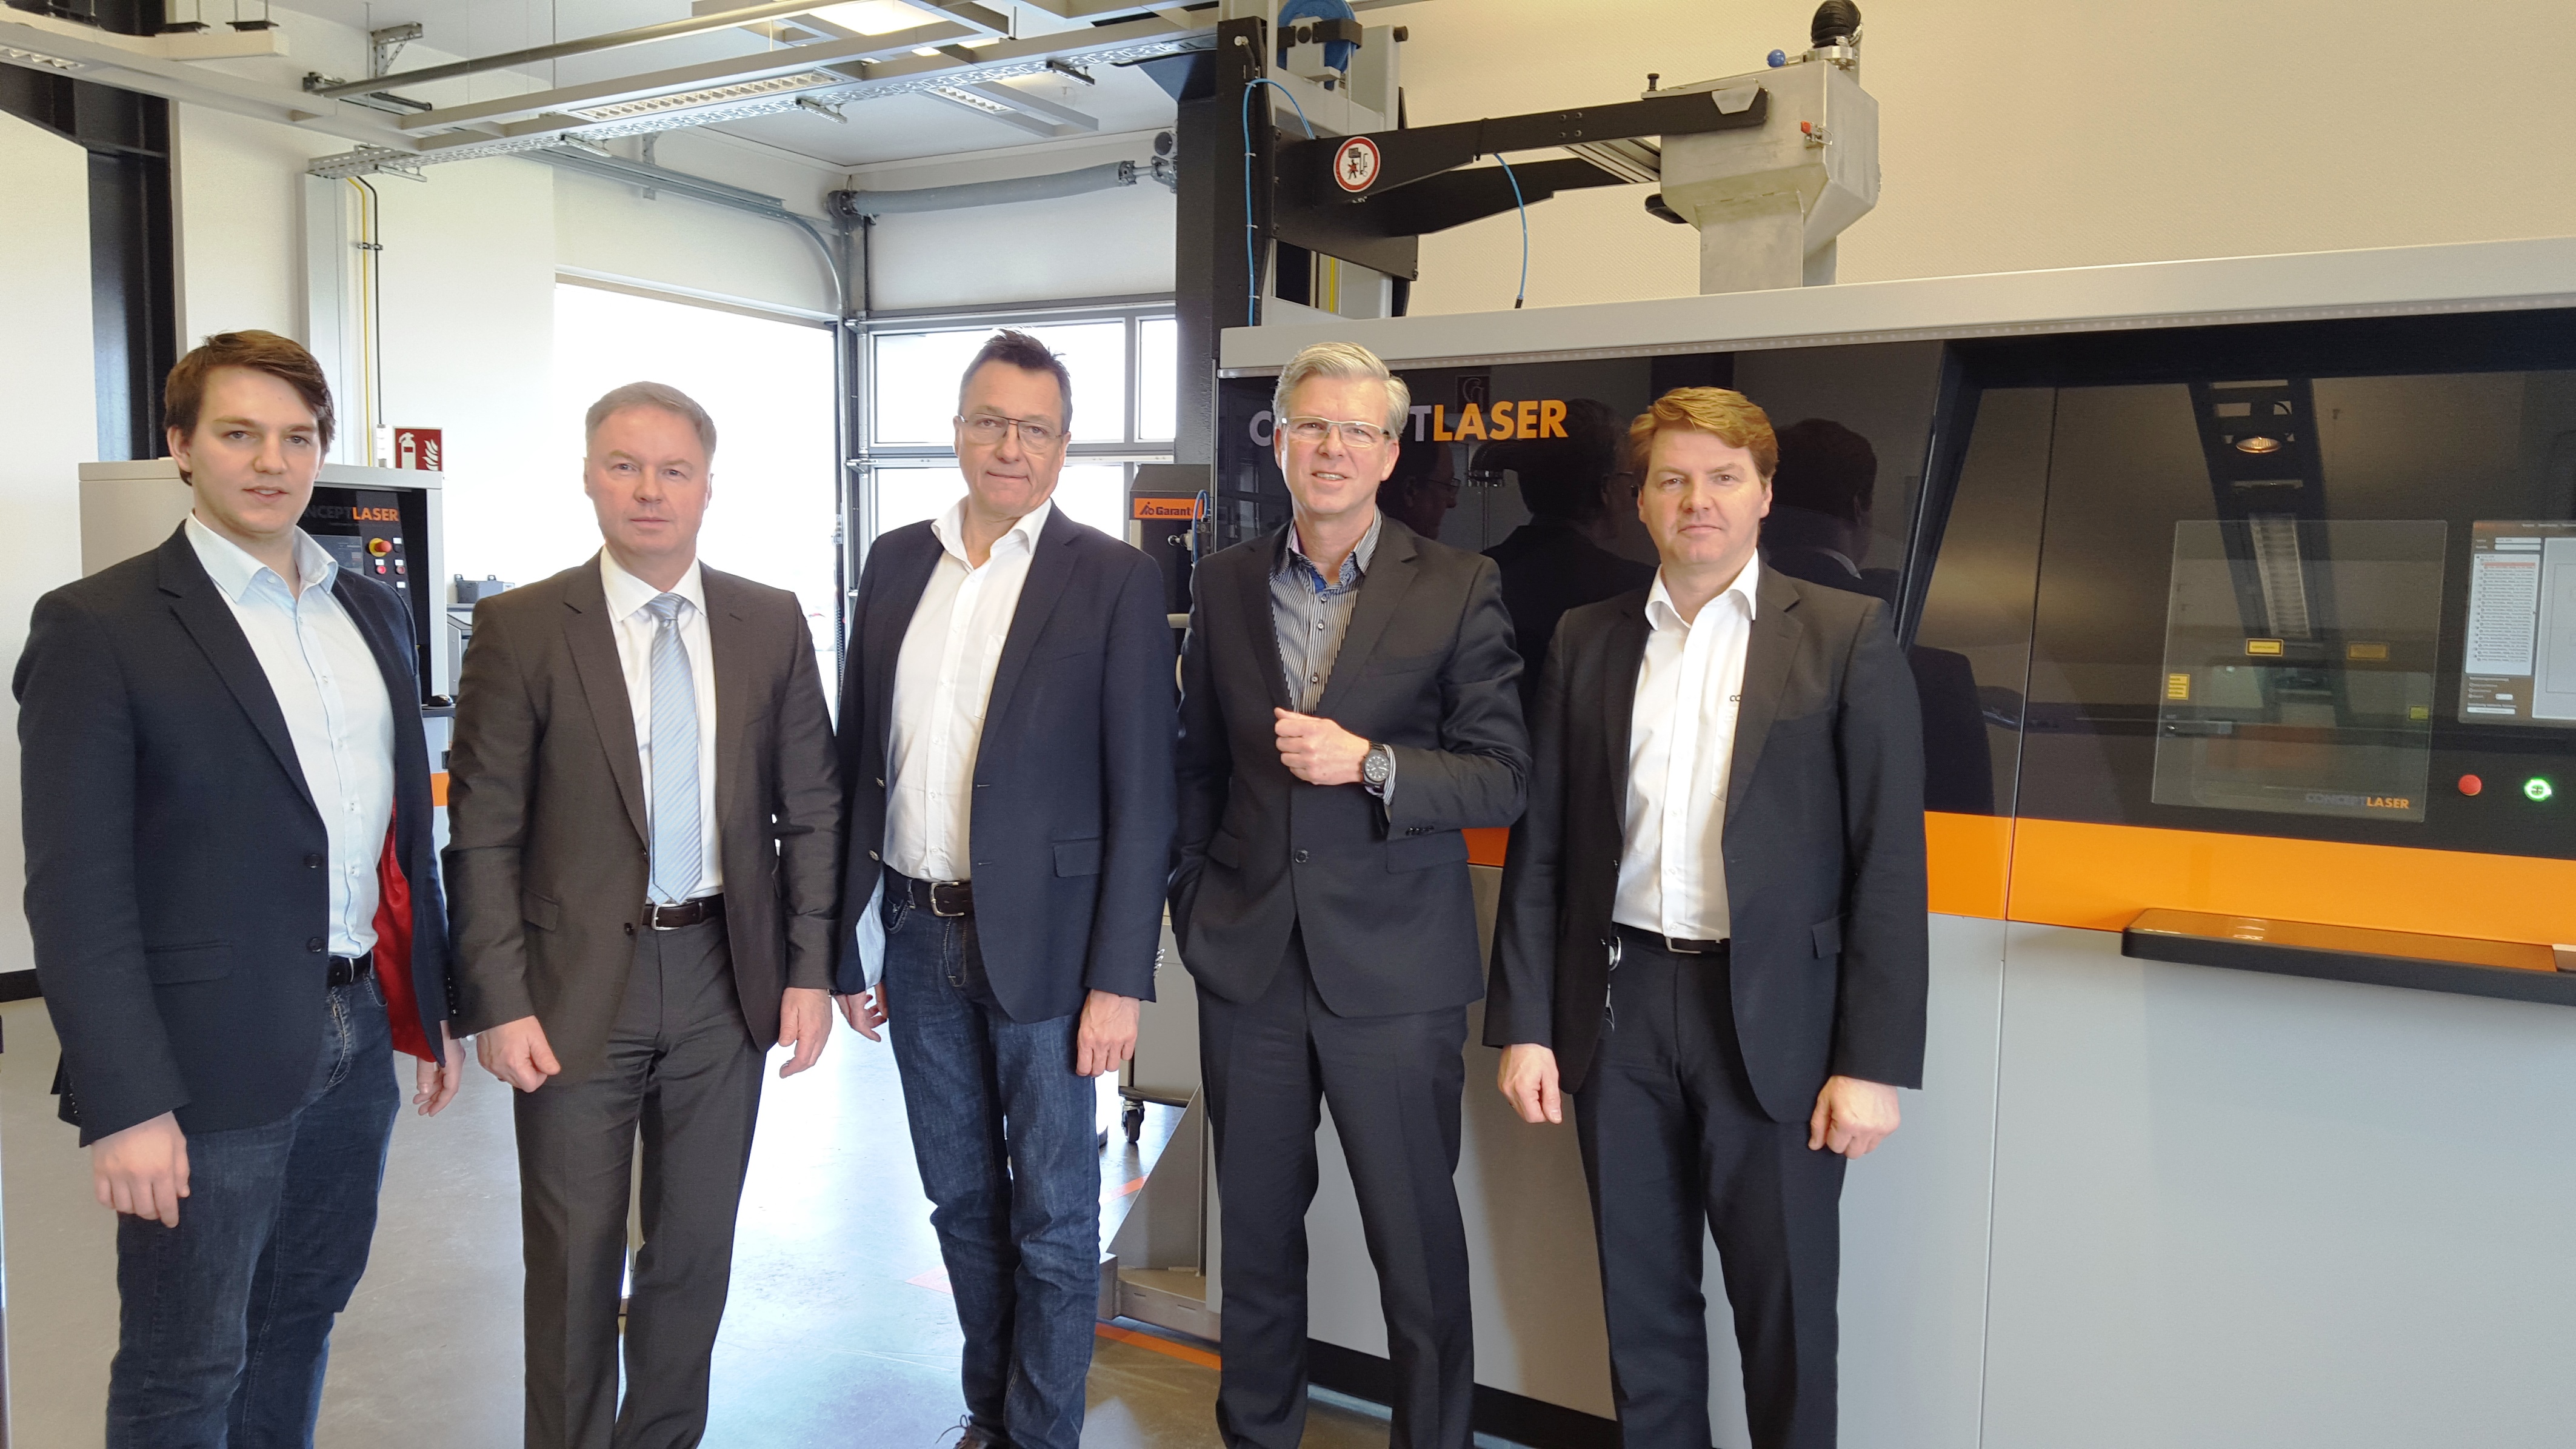 Kegelmann Manufacturing GmbH has formed a strategic partnership with Concept Laser.